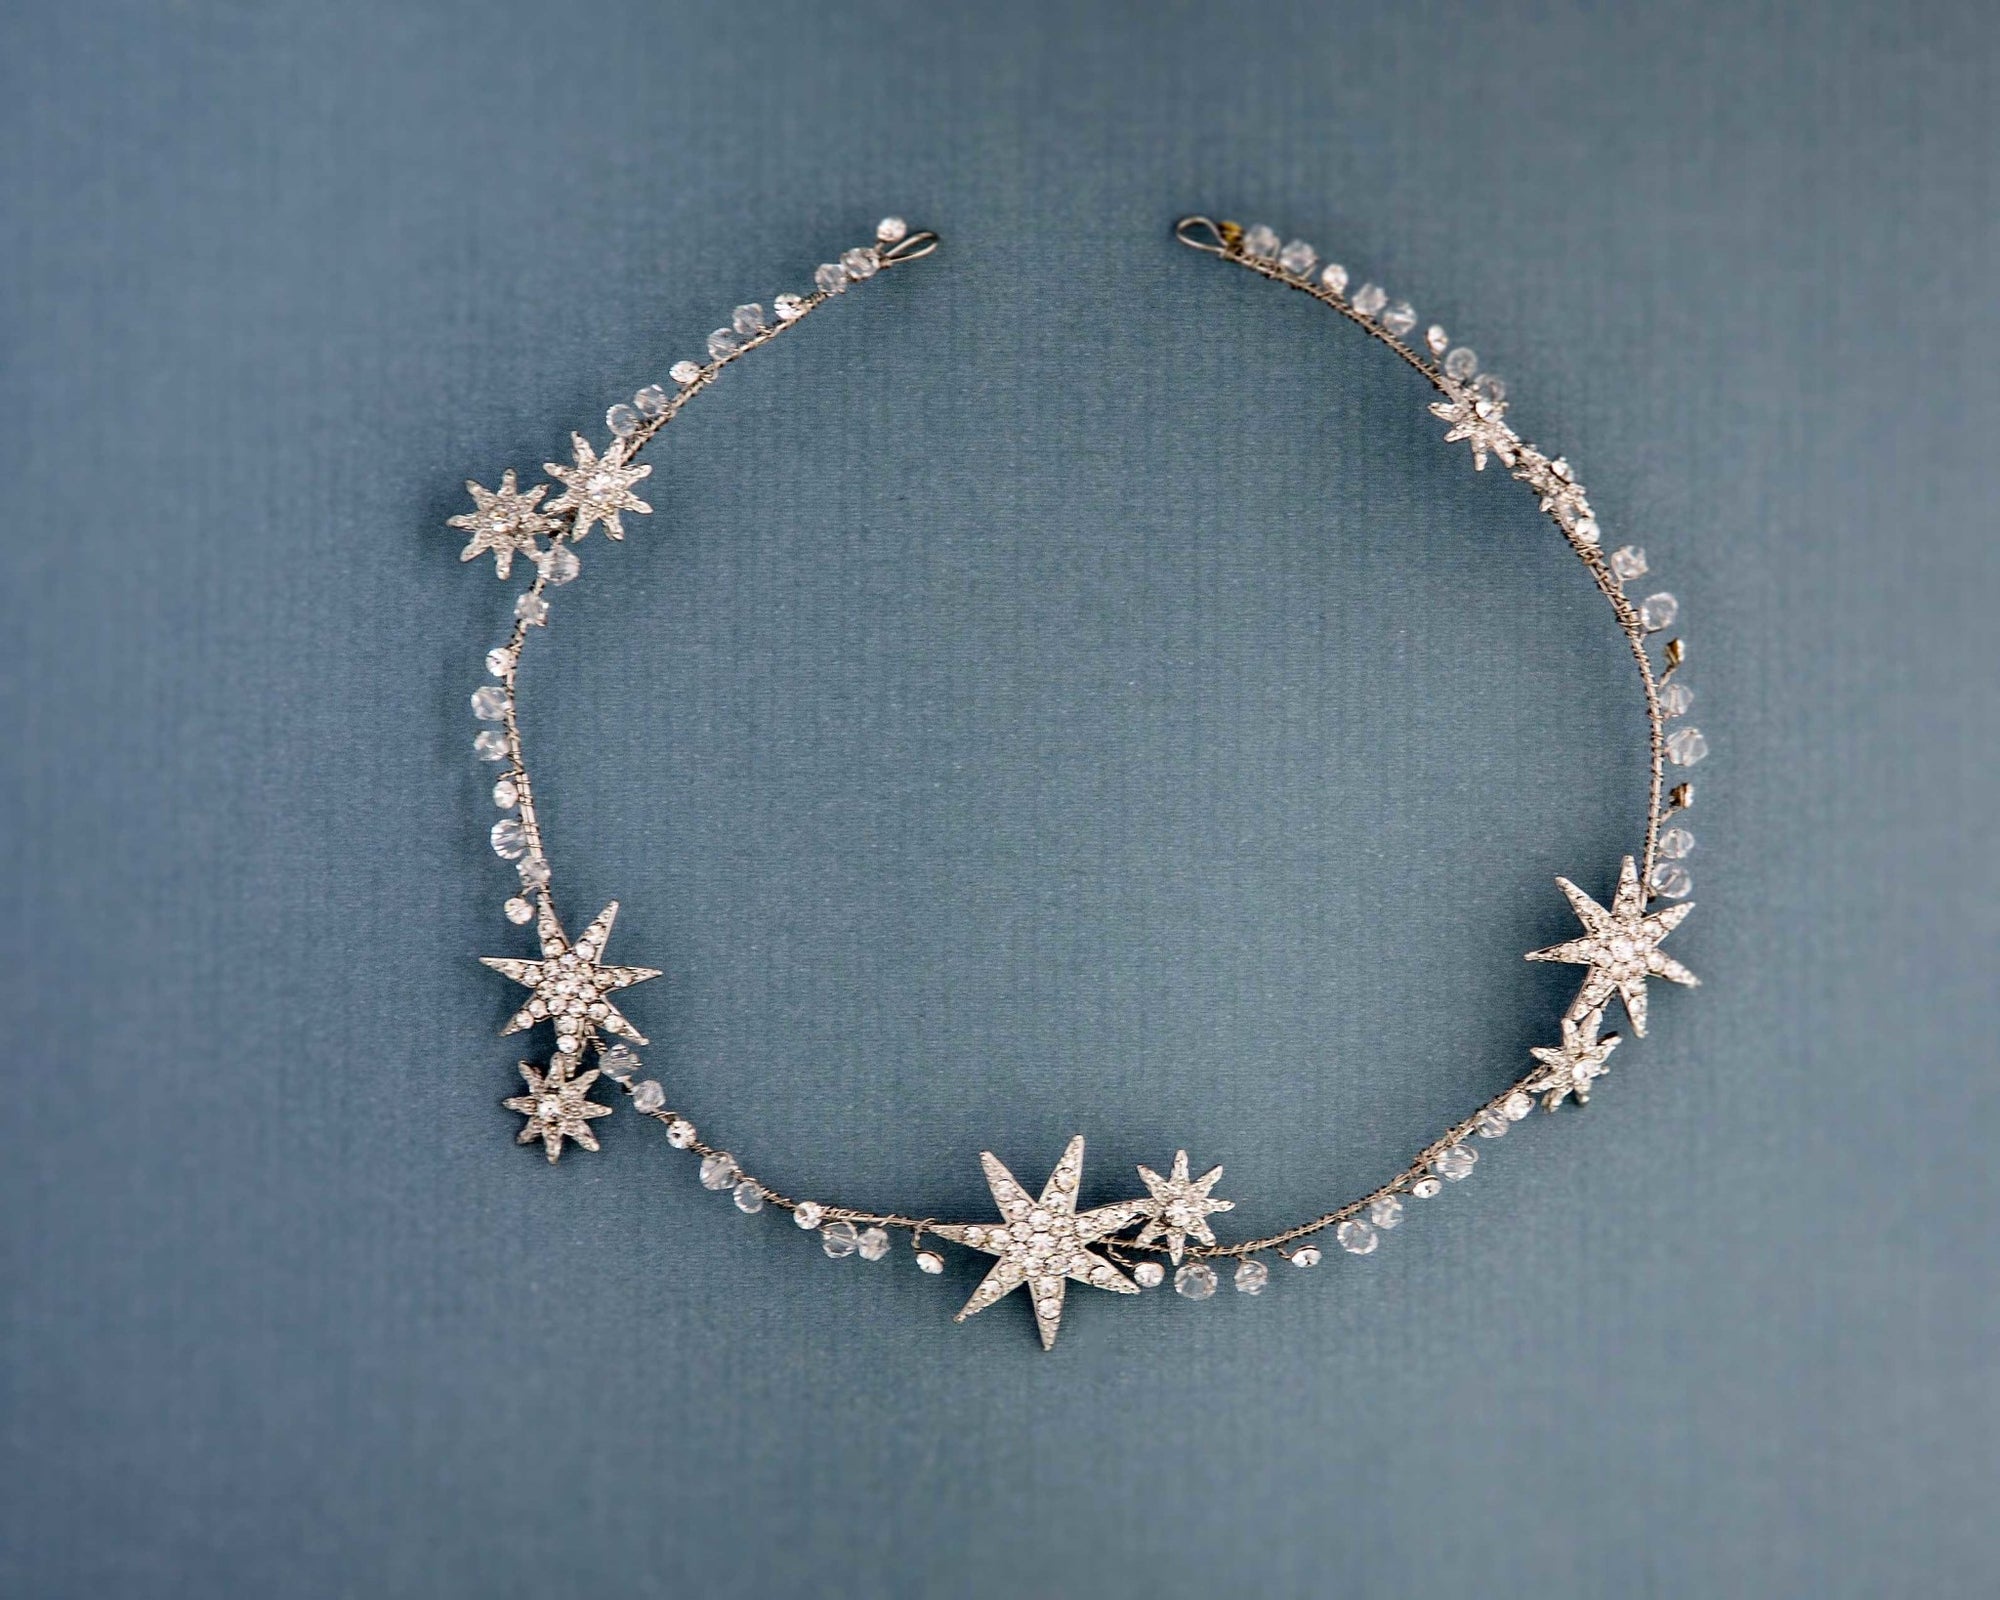 Antique Silver Stars and Crystals Headpiece - Cassandra Lynne